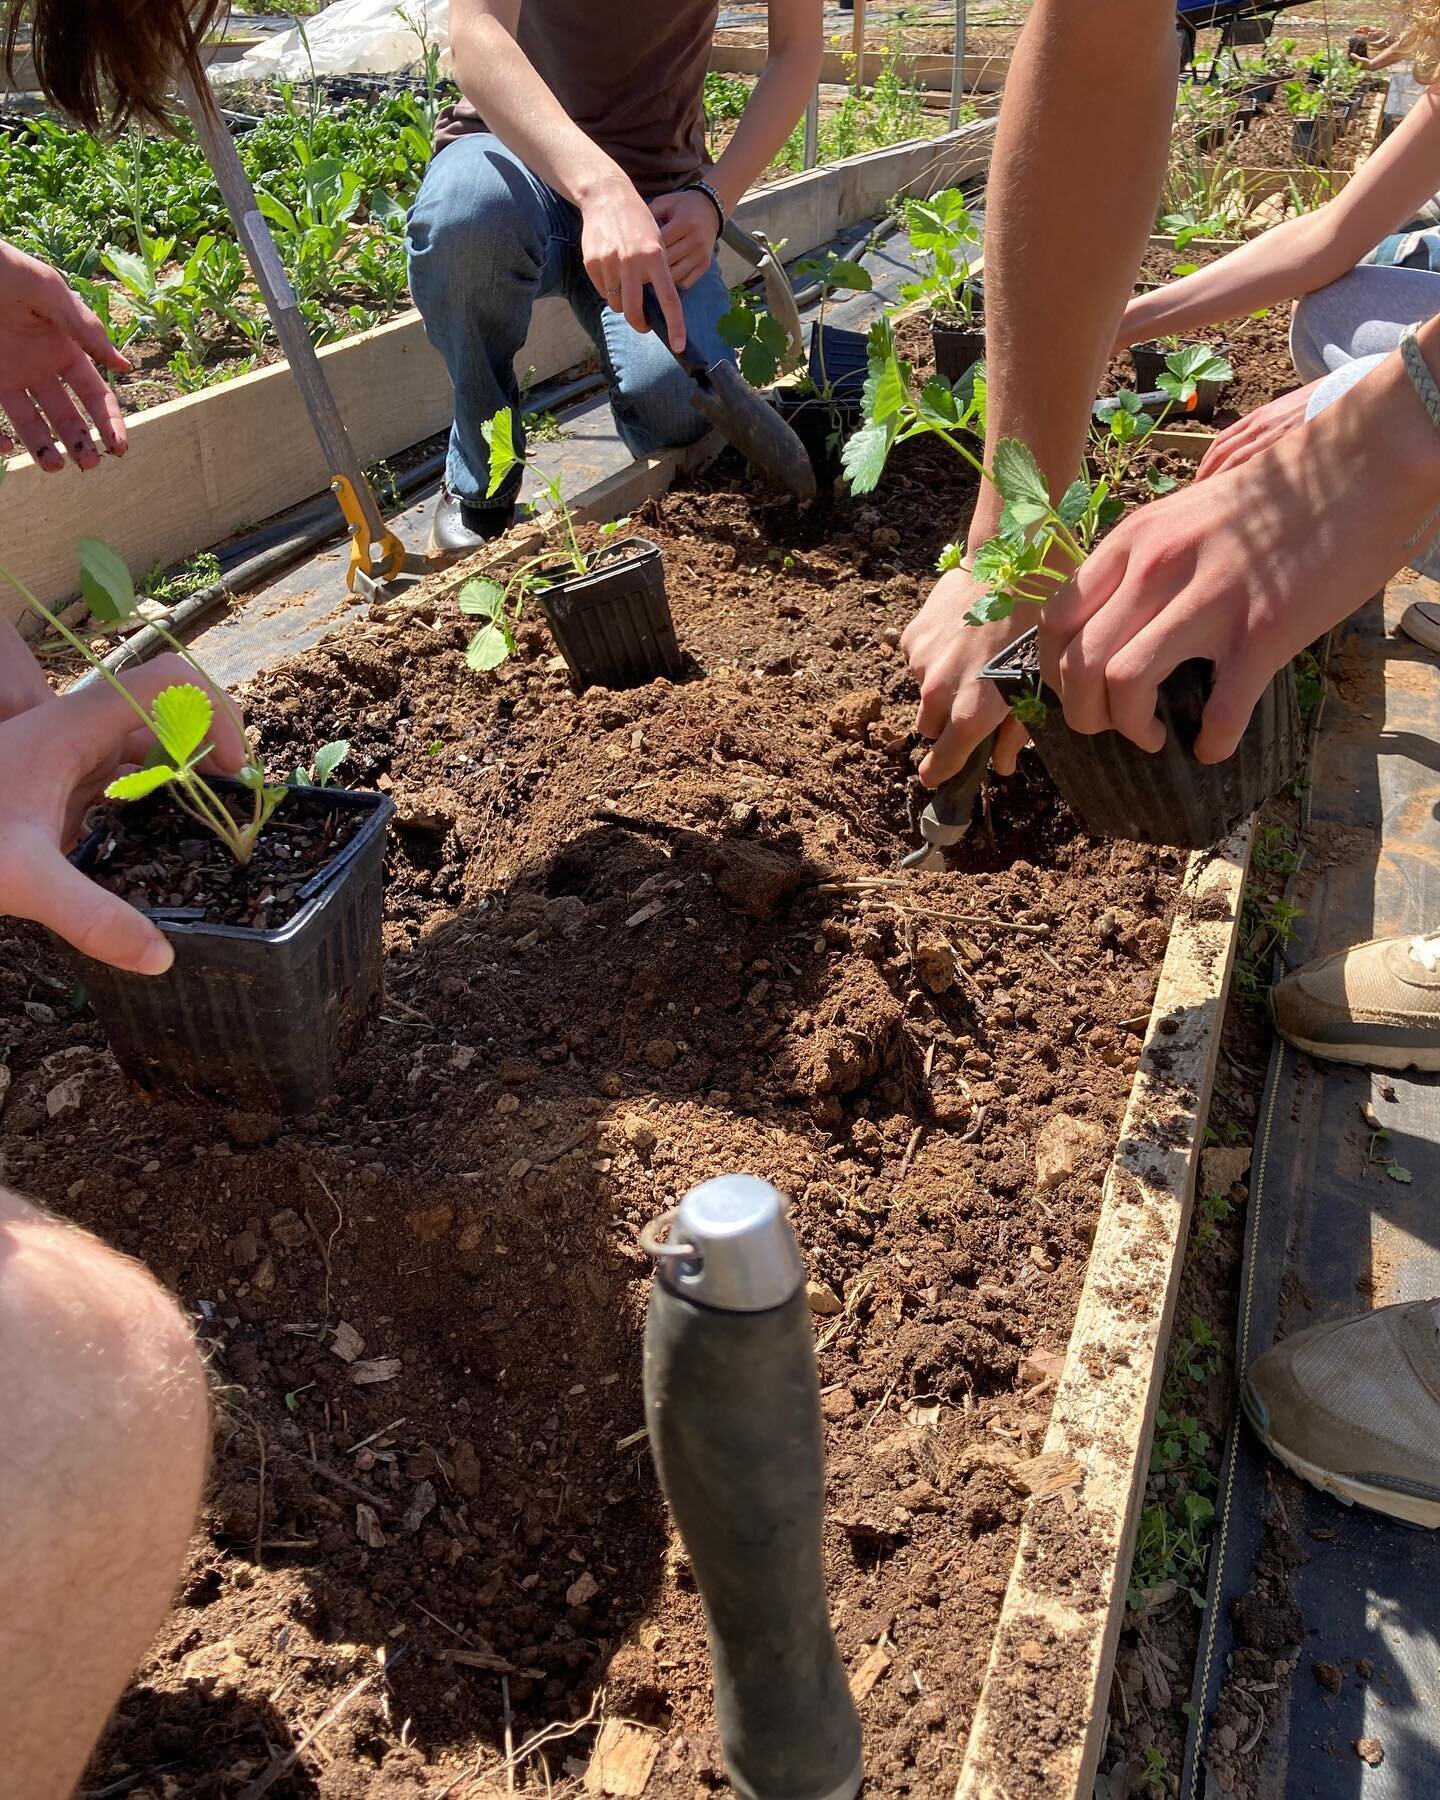 Strawberries are finally making a return to the farm!  We&rsquo;re thankful for these new raised beds with lumber from @uvasawmilling. 

#charlottesvillecityschools #chs #cityschoolyardgarden #cville #charlottesville #schoolgarden #urbanfarming #edib